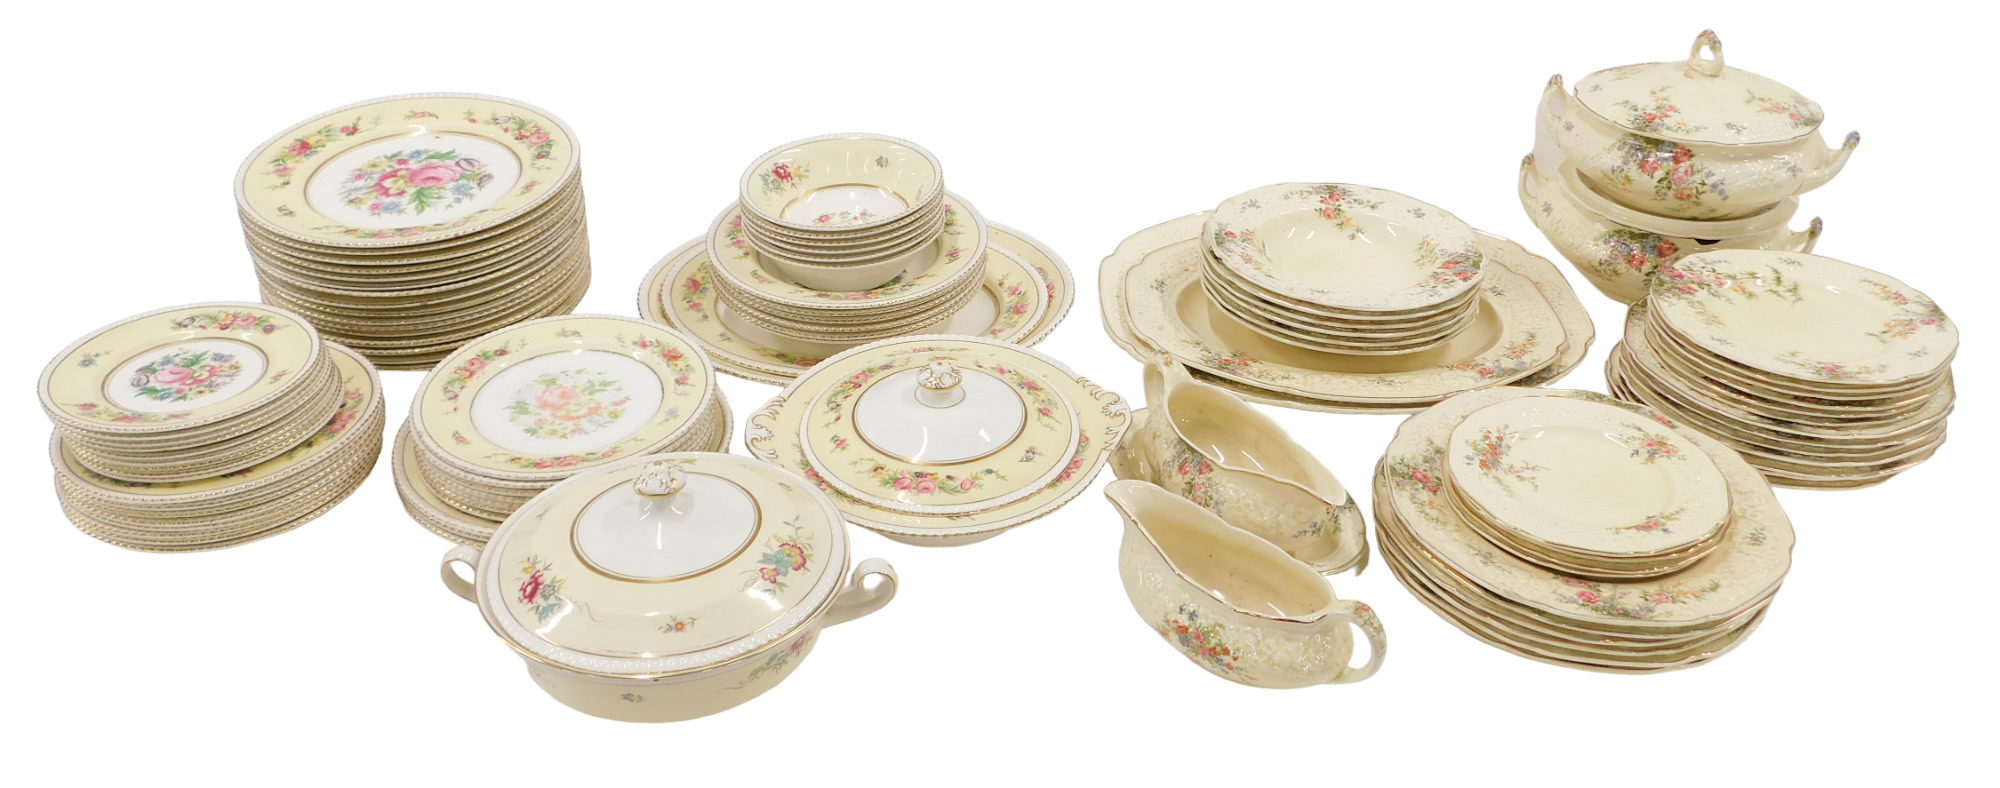 A Crown Ducal Florentine pattern part dinner service, and a similar Solianware dinner service.